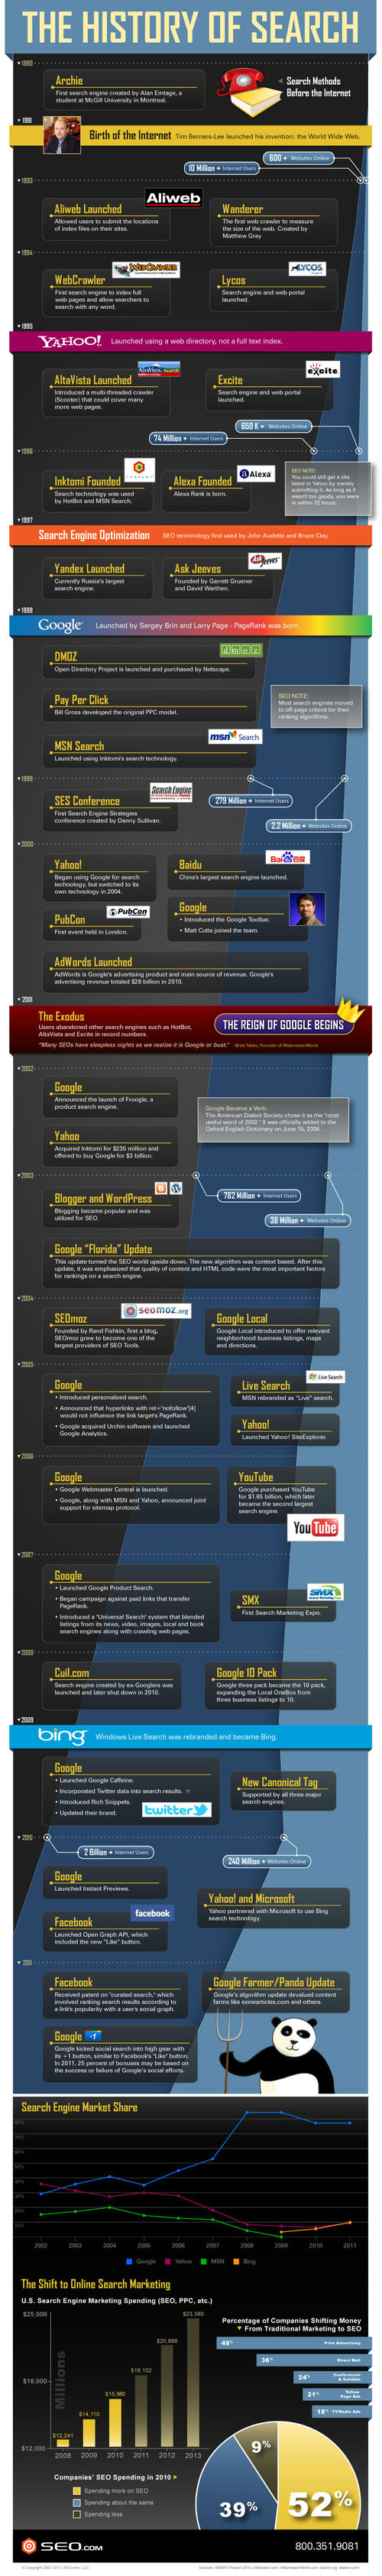 The Histrory of Search [infographic]